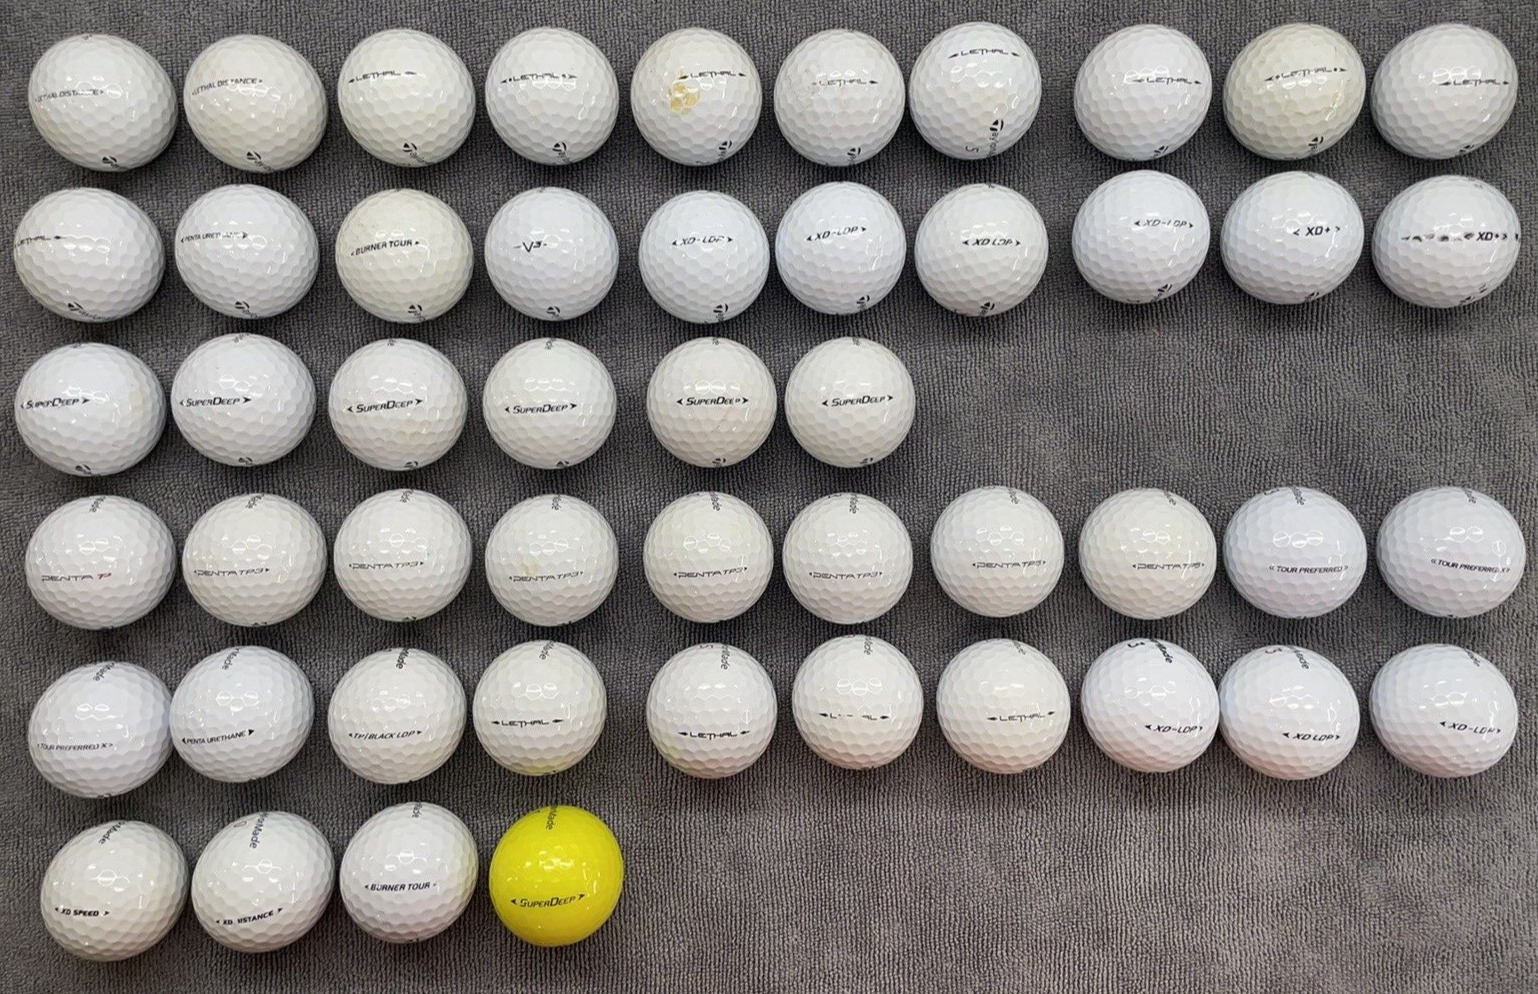 50 AAA+ Taylormade Lethal / Penta TP / Tour Preferred Golf Balls (INV#DUG)